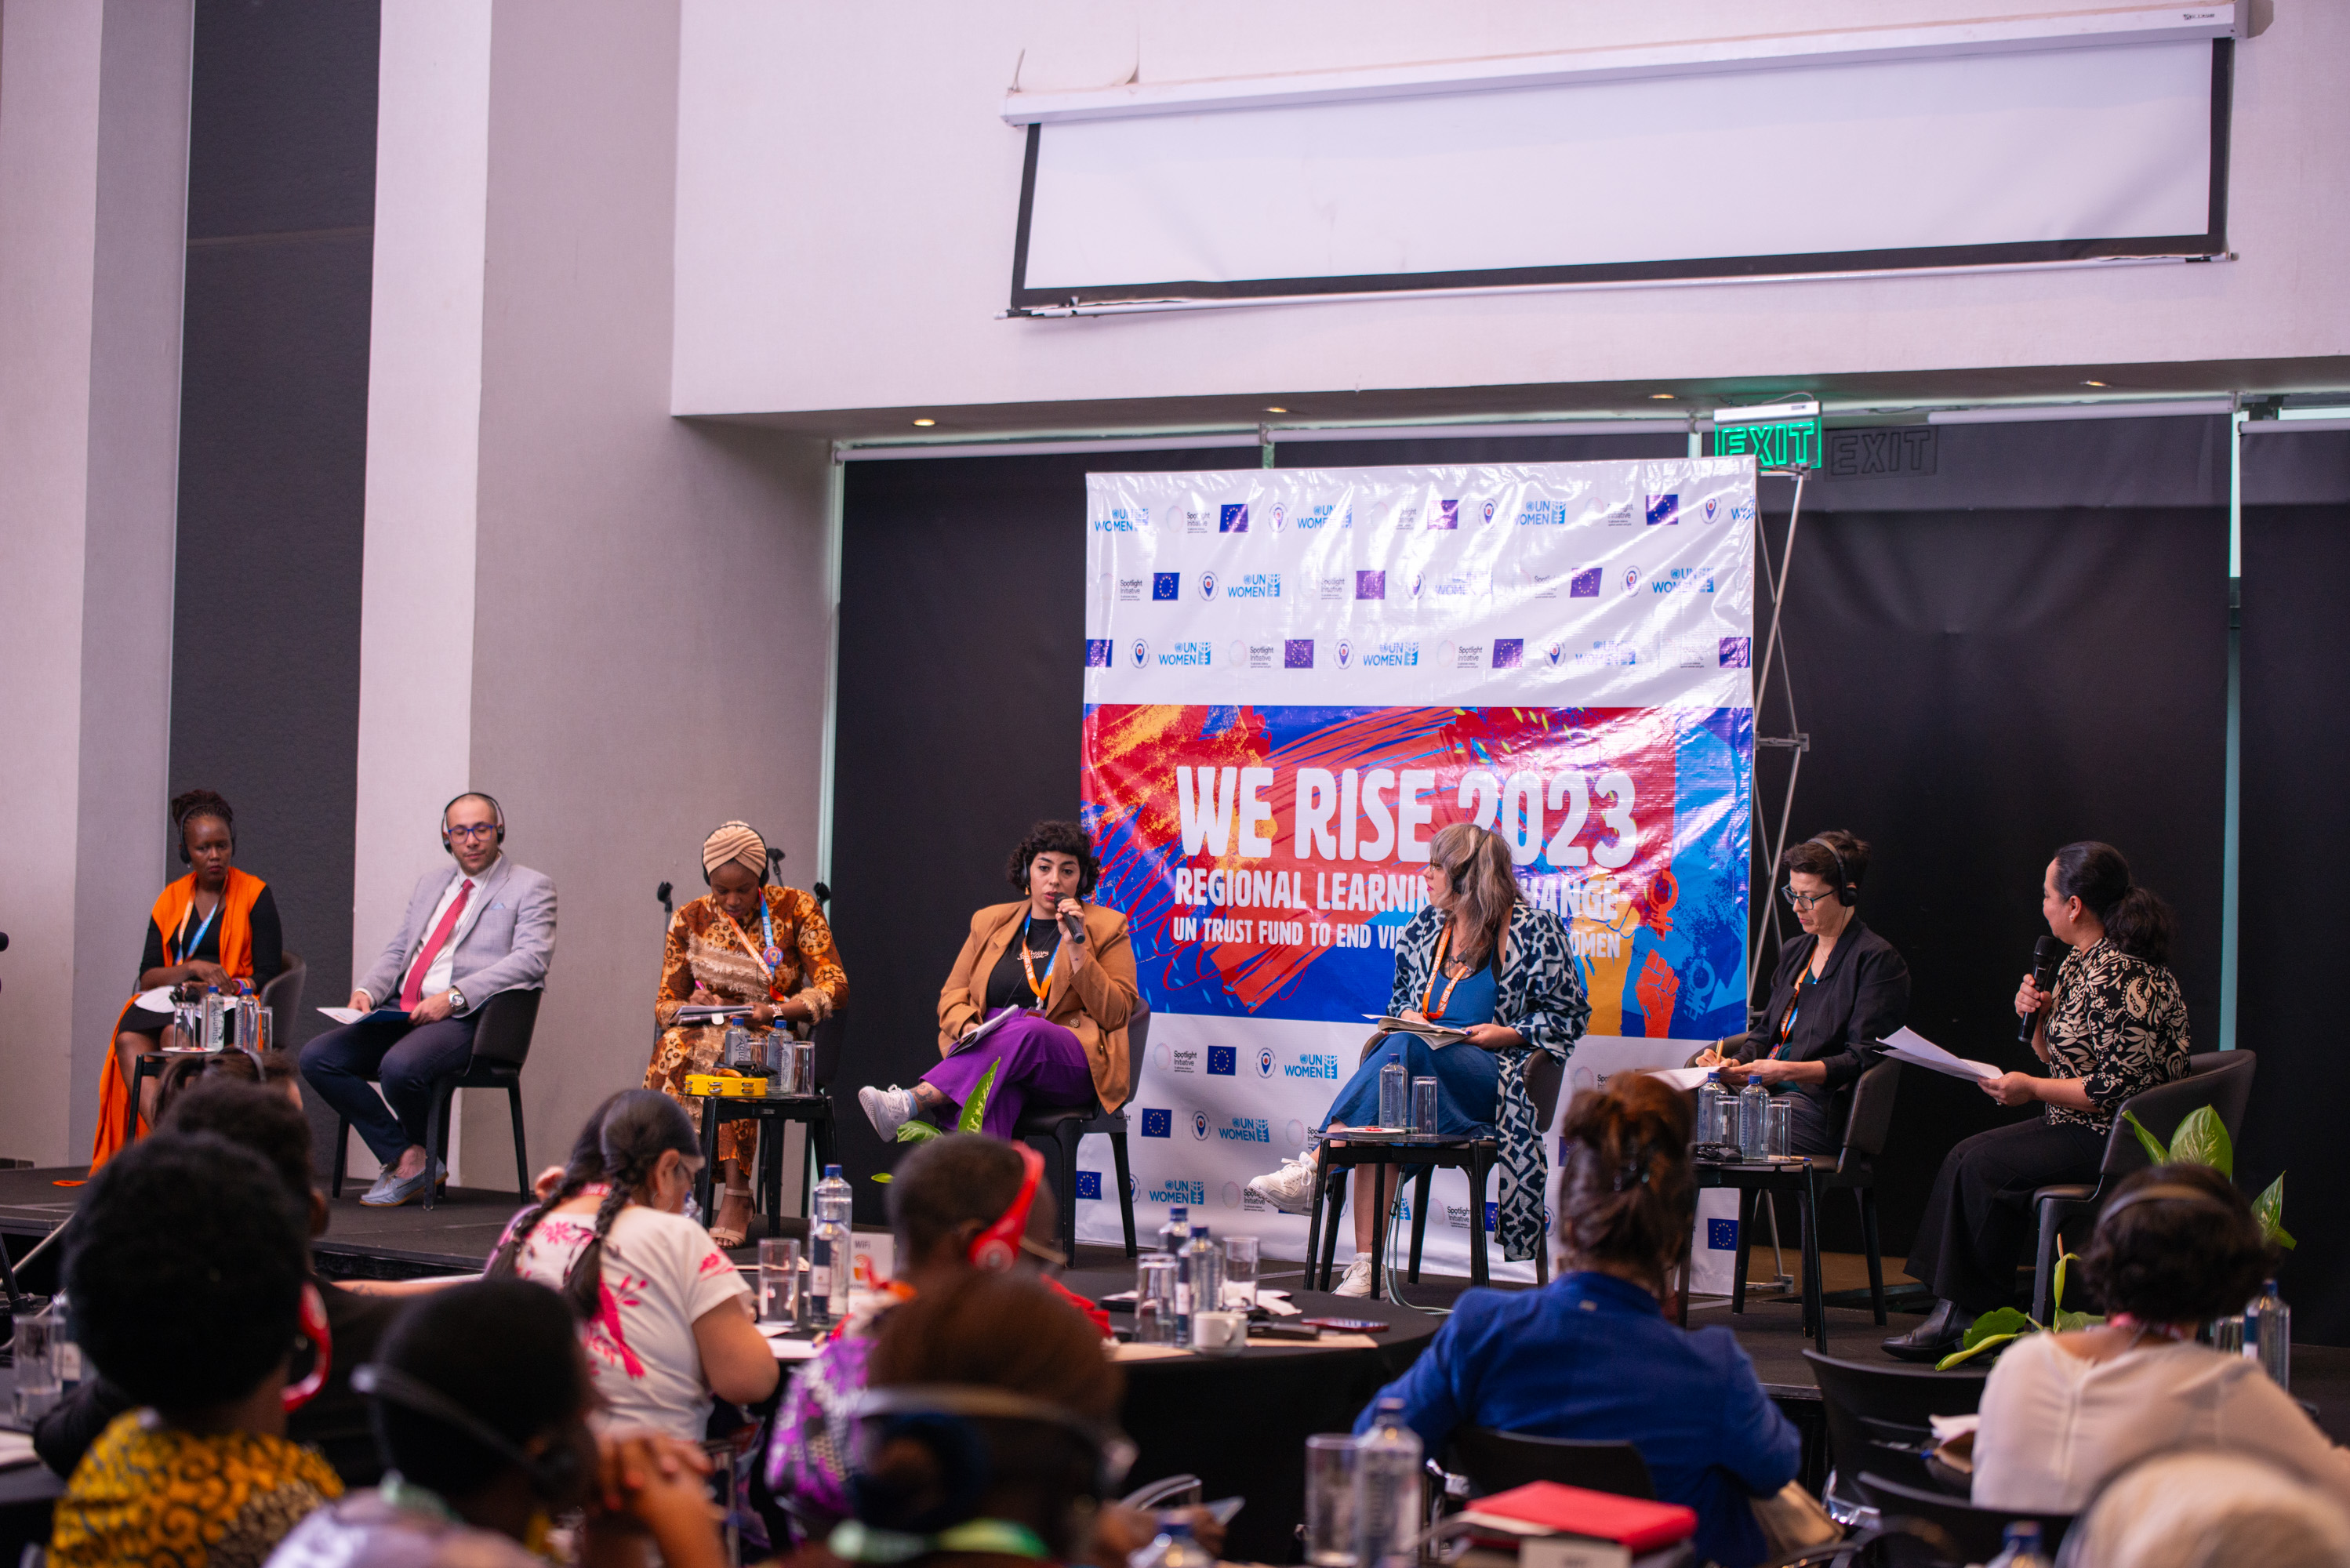 Panelists at the "Funding feminist movements" plenary discussion at We Rise 2023